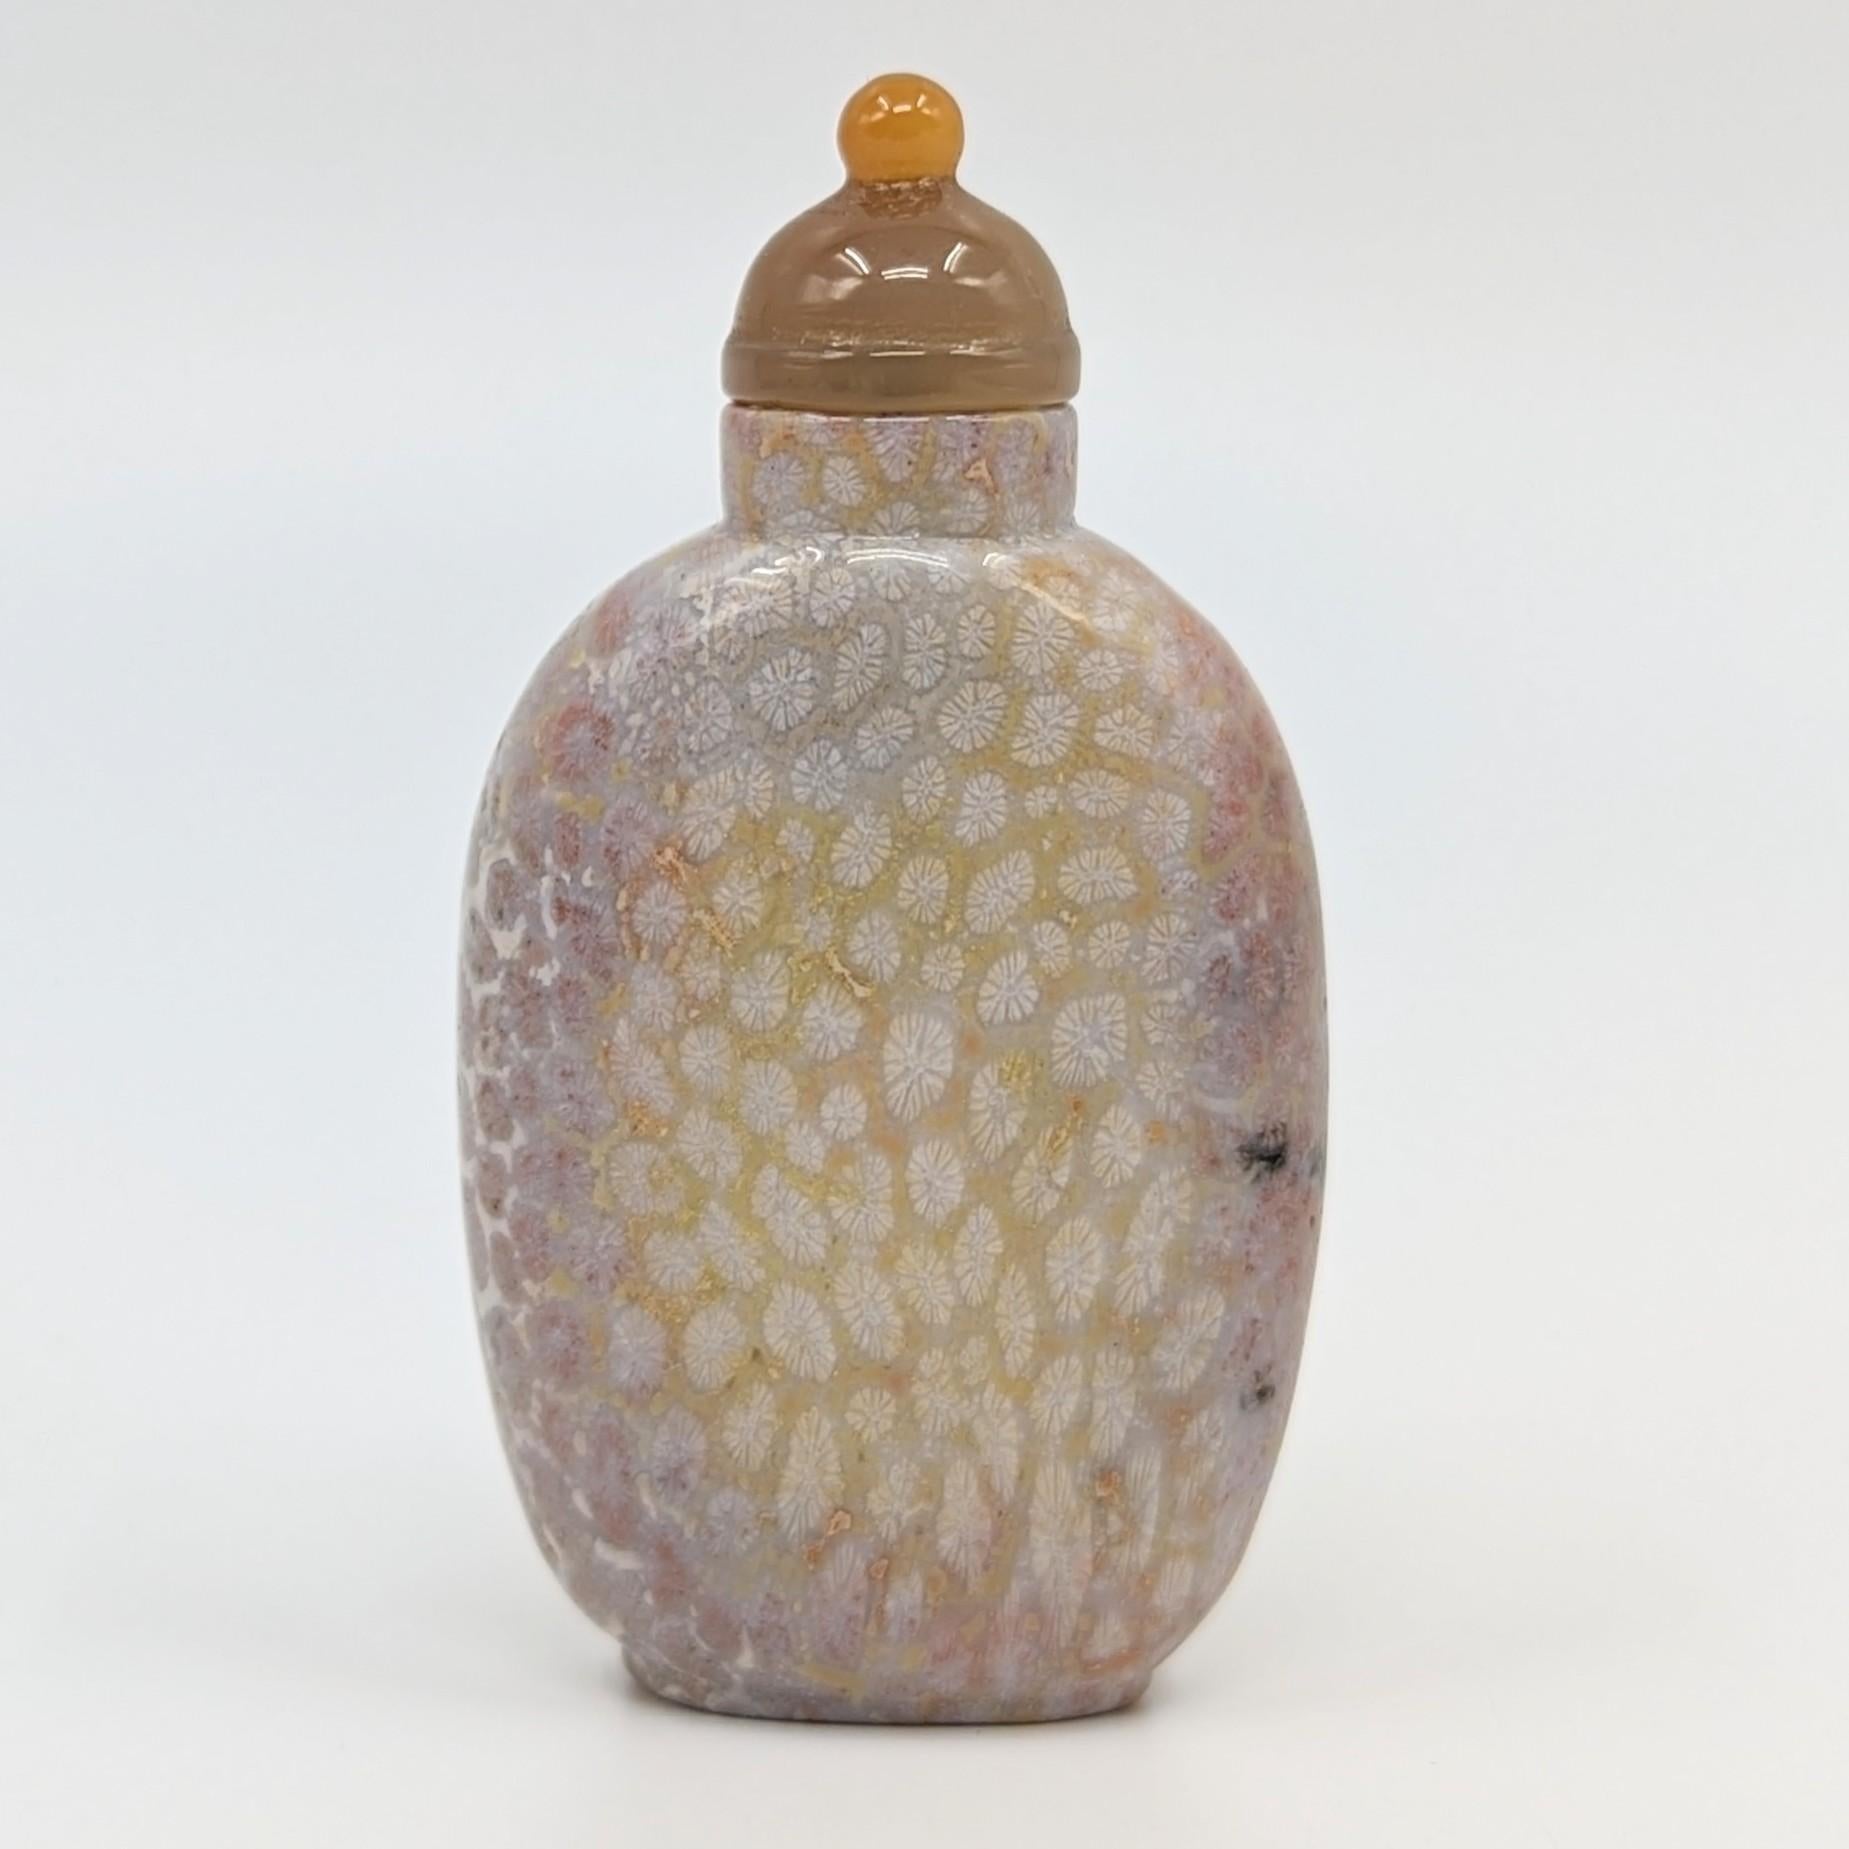 Antique Chinese fossil containing hardstone snuff bottle with an agate stopper and hardwood spoon, raised on a flat foot ring. The material displays beautiful ，fossilized polyps patterns and colors including hues of white, yellow, pink and